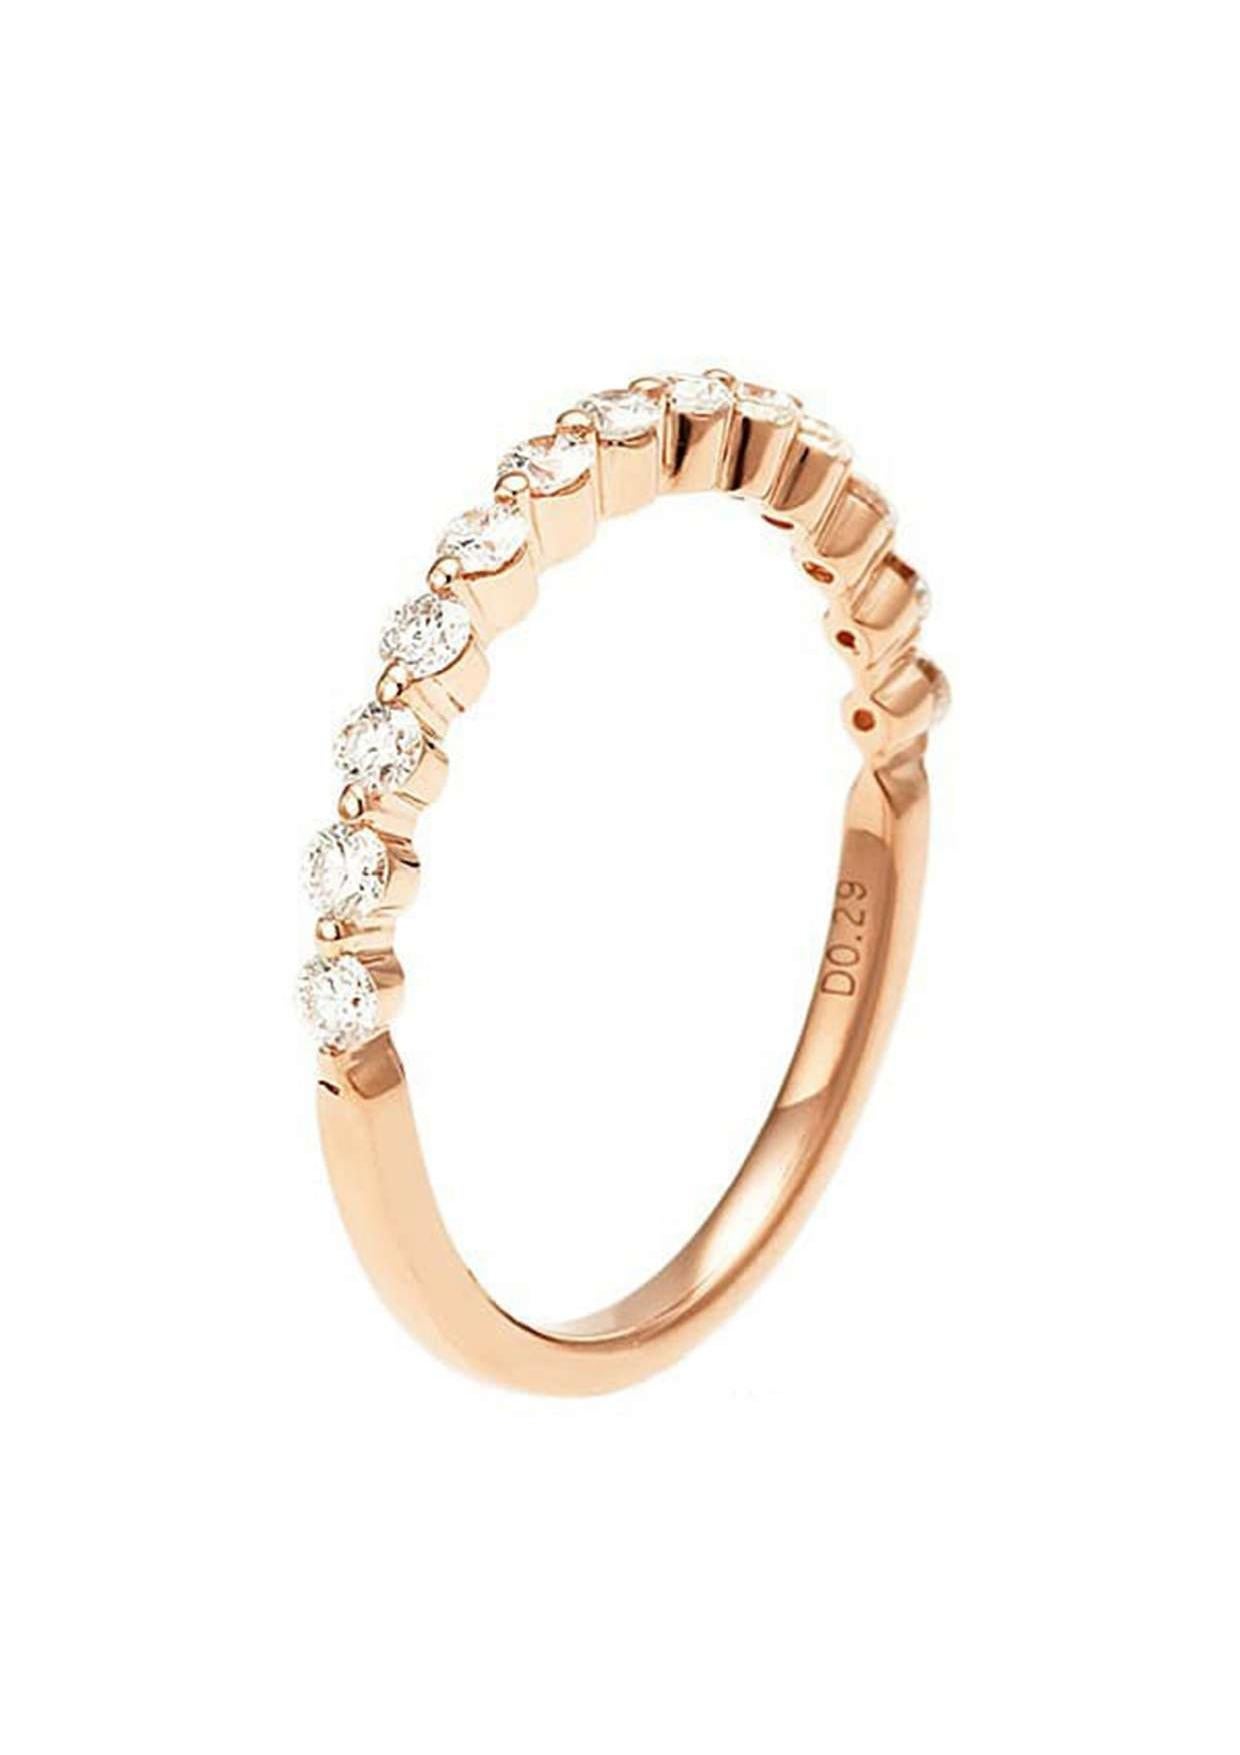 Elevate your jewelry collection with this stunning 18K Pink Gold Half Eternity Diamond Ring, featuring sparkling diamonds totaling 0.29ct.

Details:
* SKU: cin428-8
* Material: 18K Pink Gold
* Jewelry Type: Ring
* Diamond Size: 0.29ct
* Ring Size: